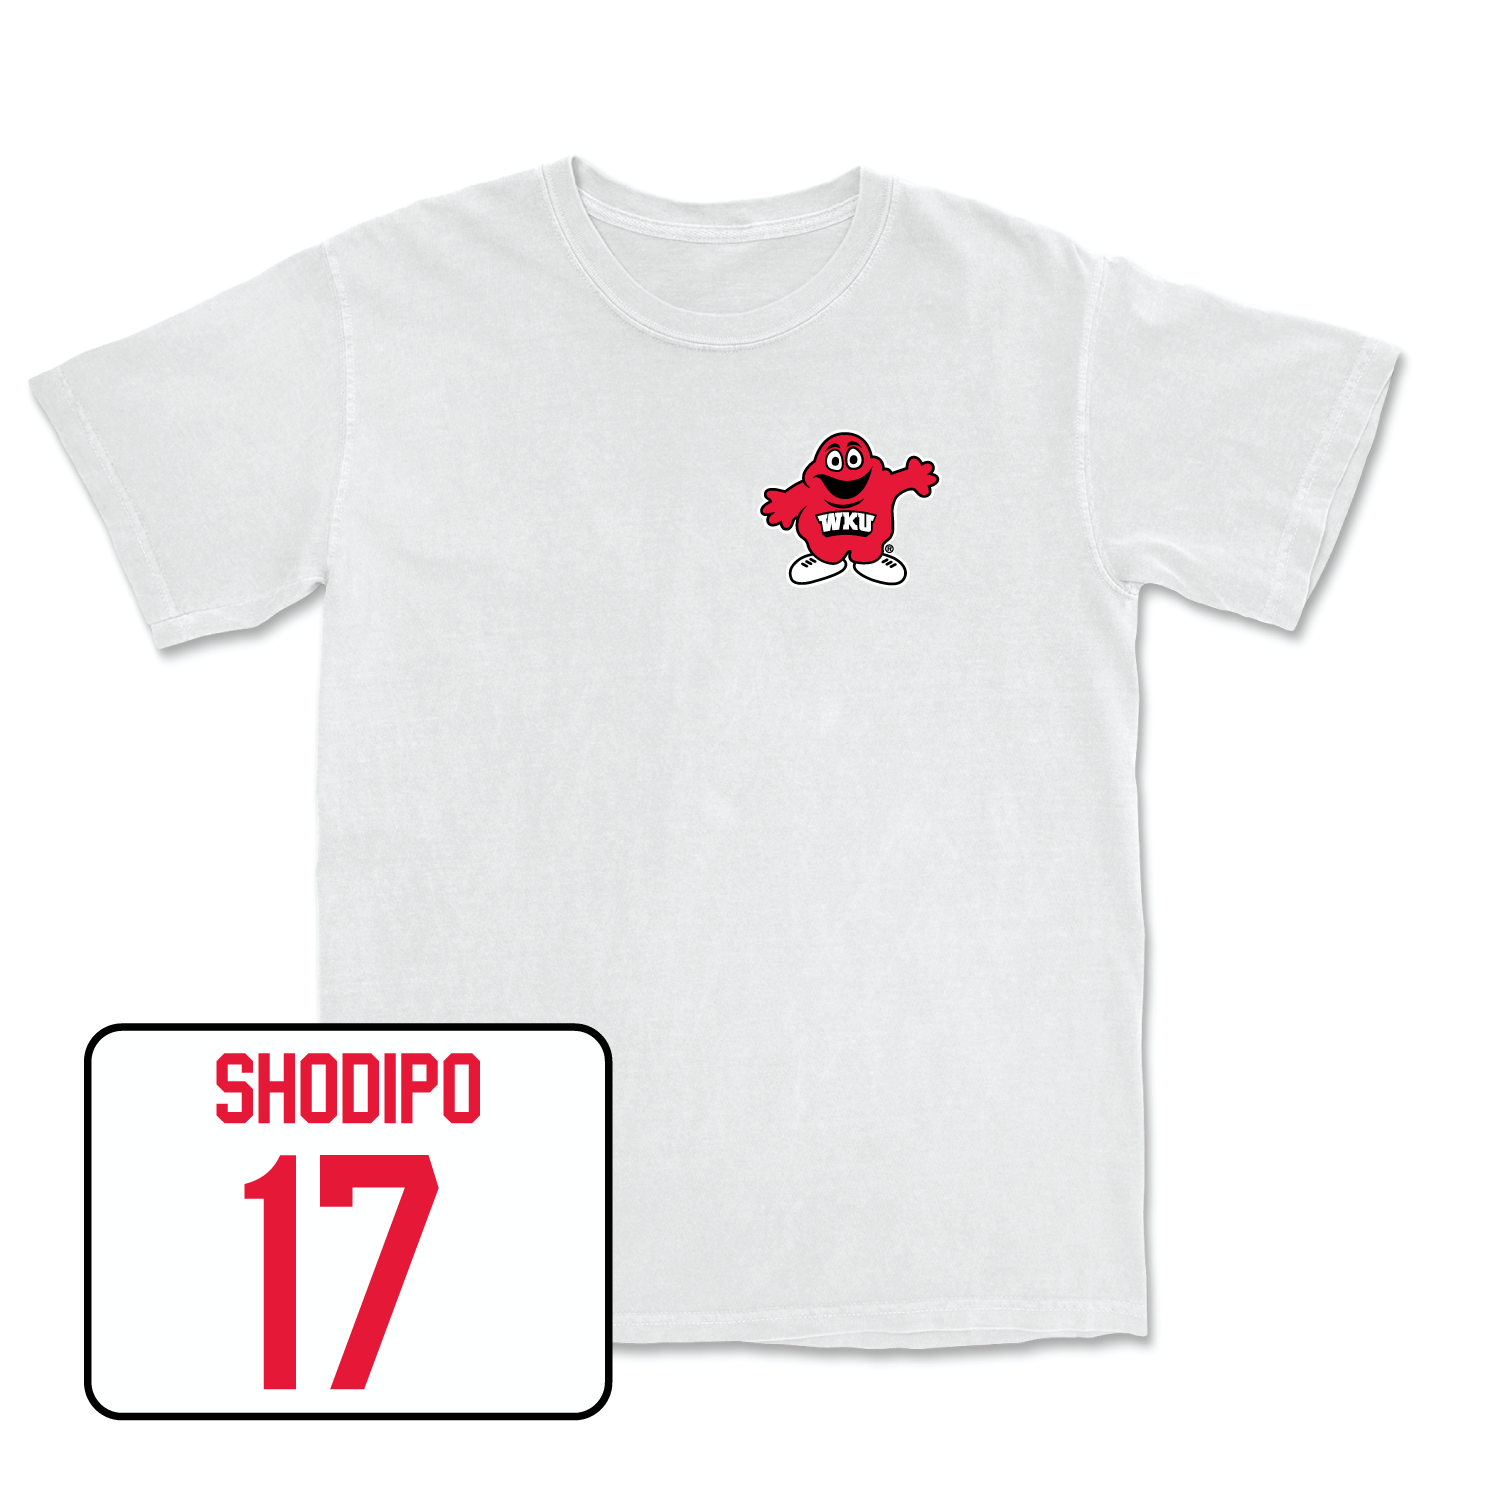 White Football Big Red Comfort Colors Tee 4 Youth Large / Josh Shodipo | #17